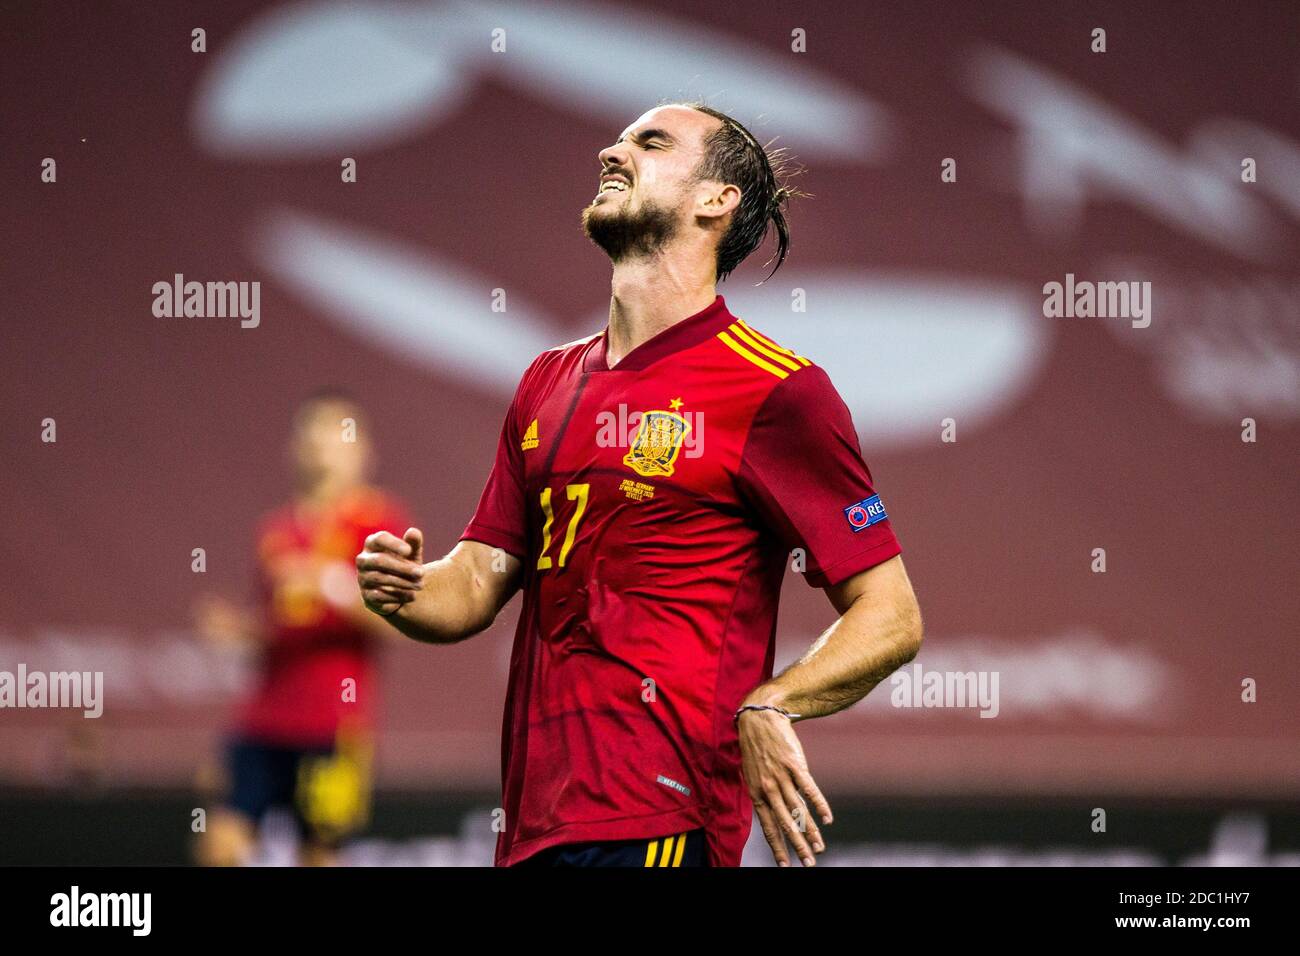 Fabian Ruiz of Spain during the UEFA Nations league football match between Spain and Germany on November 17, 2020 at the la  / LM Stock Photo